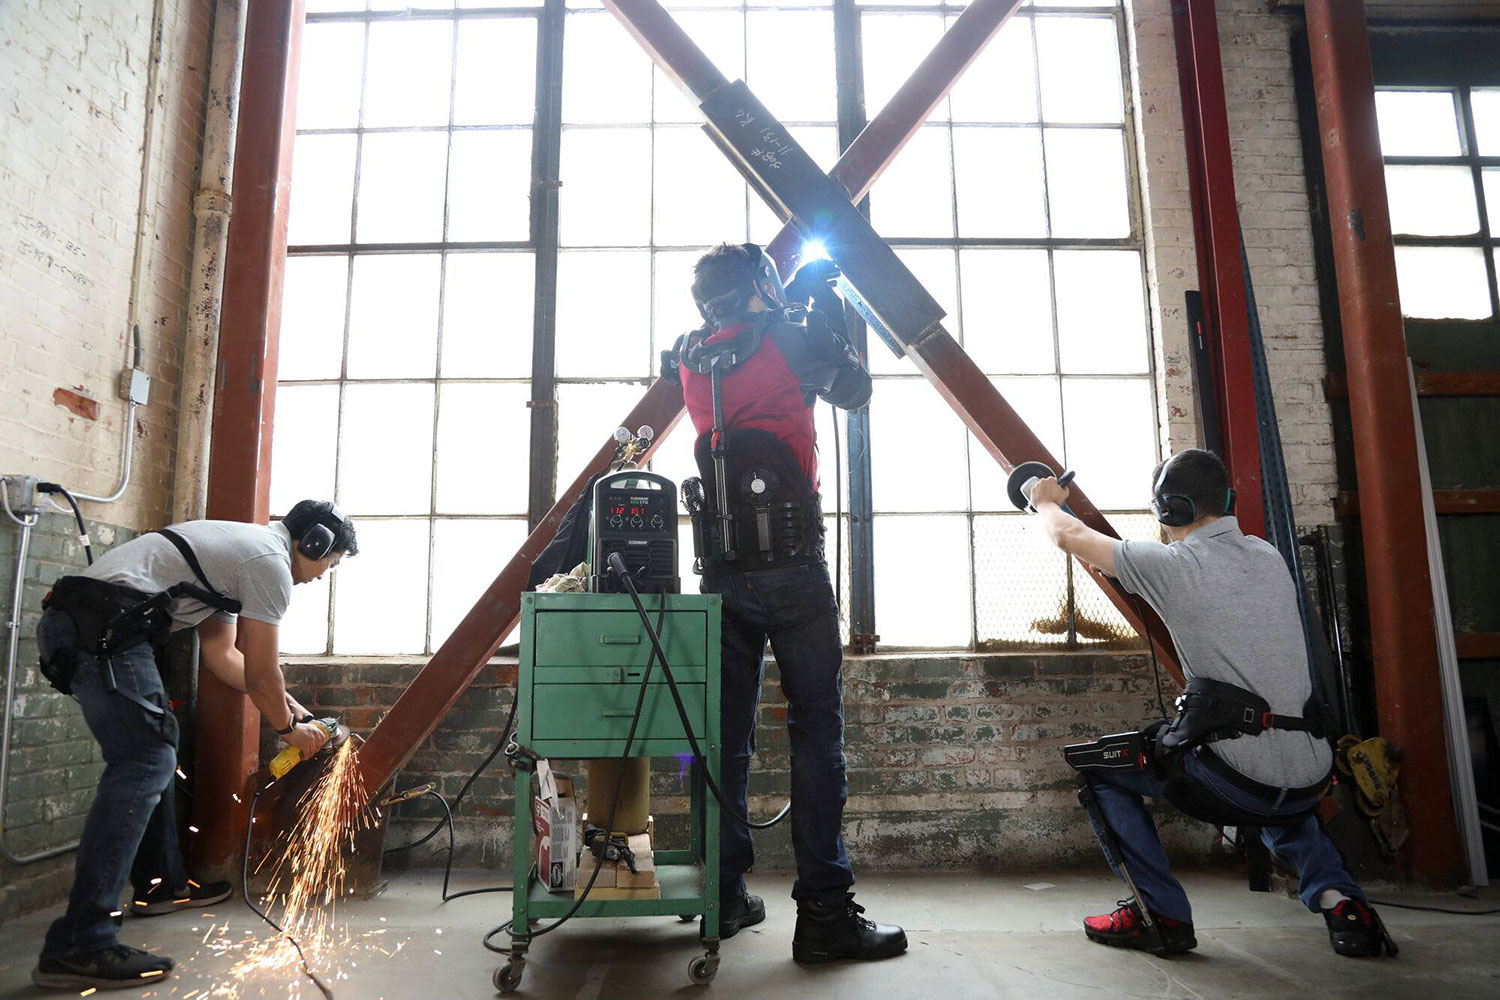 SuitX's Iron Man-like exoskeleton prevents injuries in heavy lifting jobs.